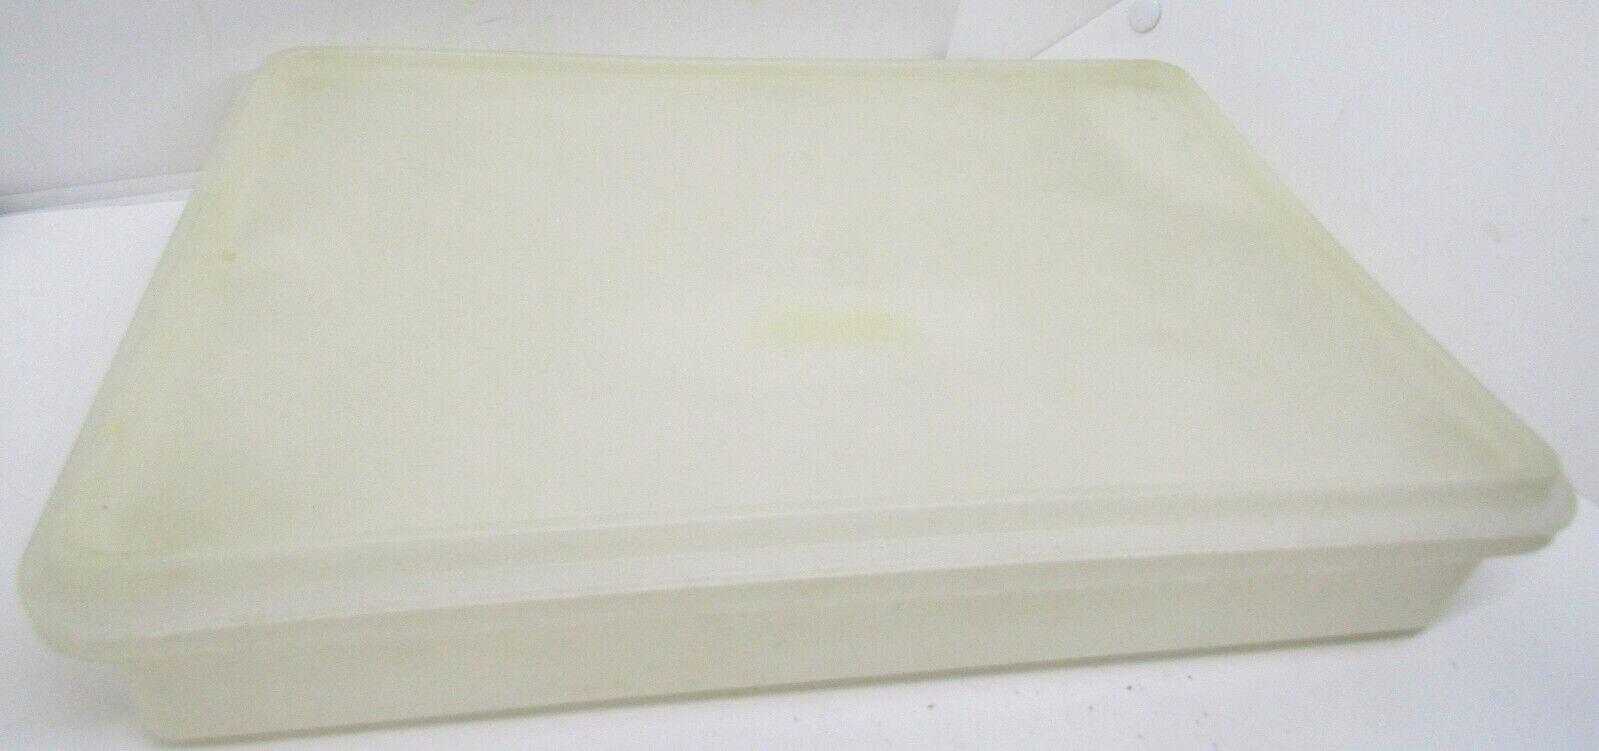 Vintage Tupperware 290-3 Rectangular 13x9x3 inch Container w/ Lid 291-3